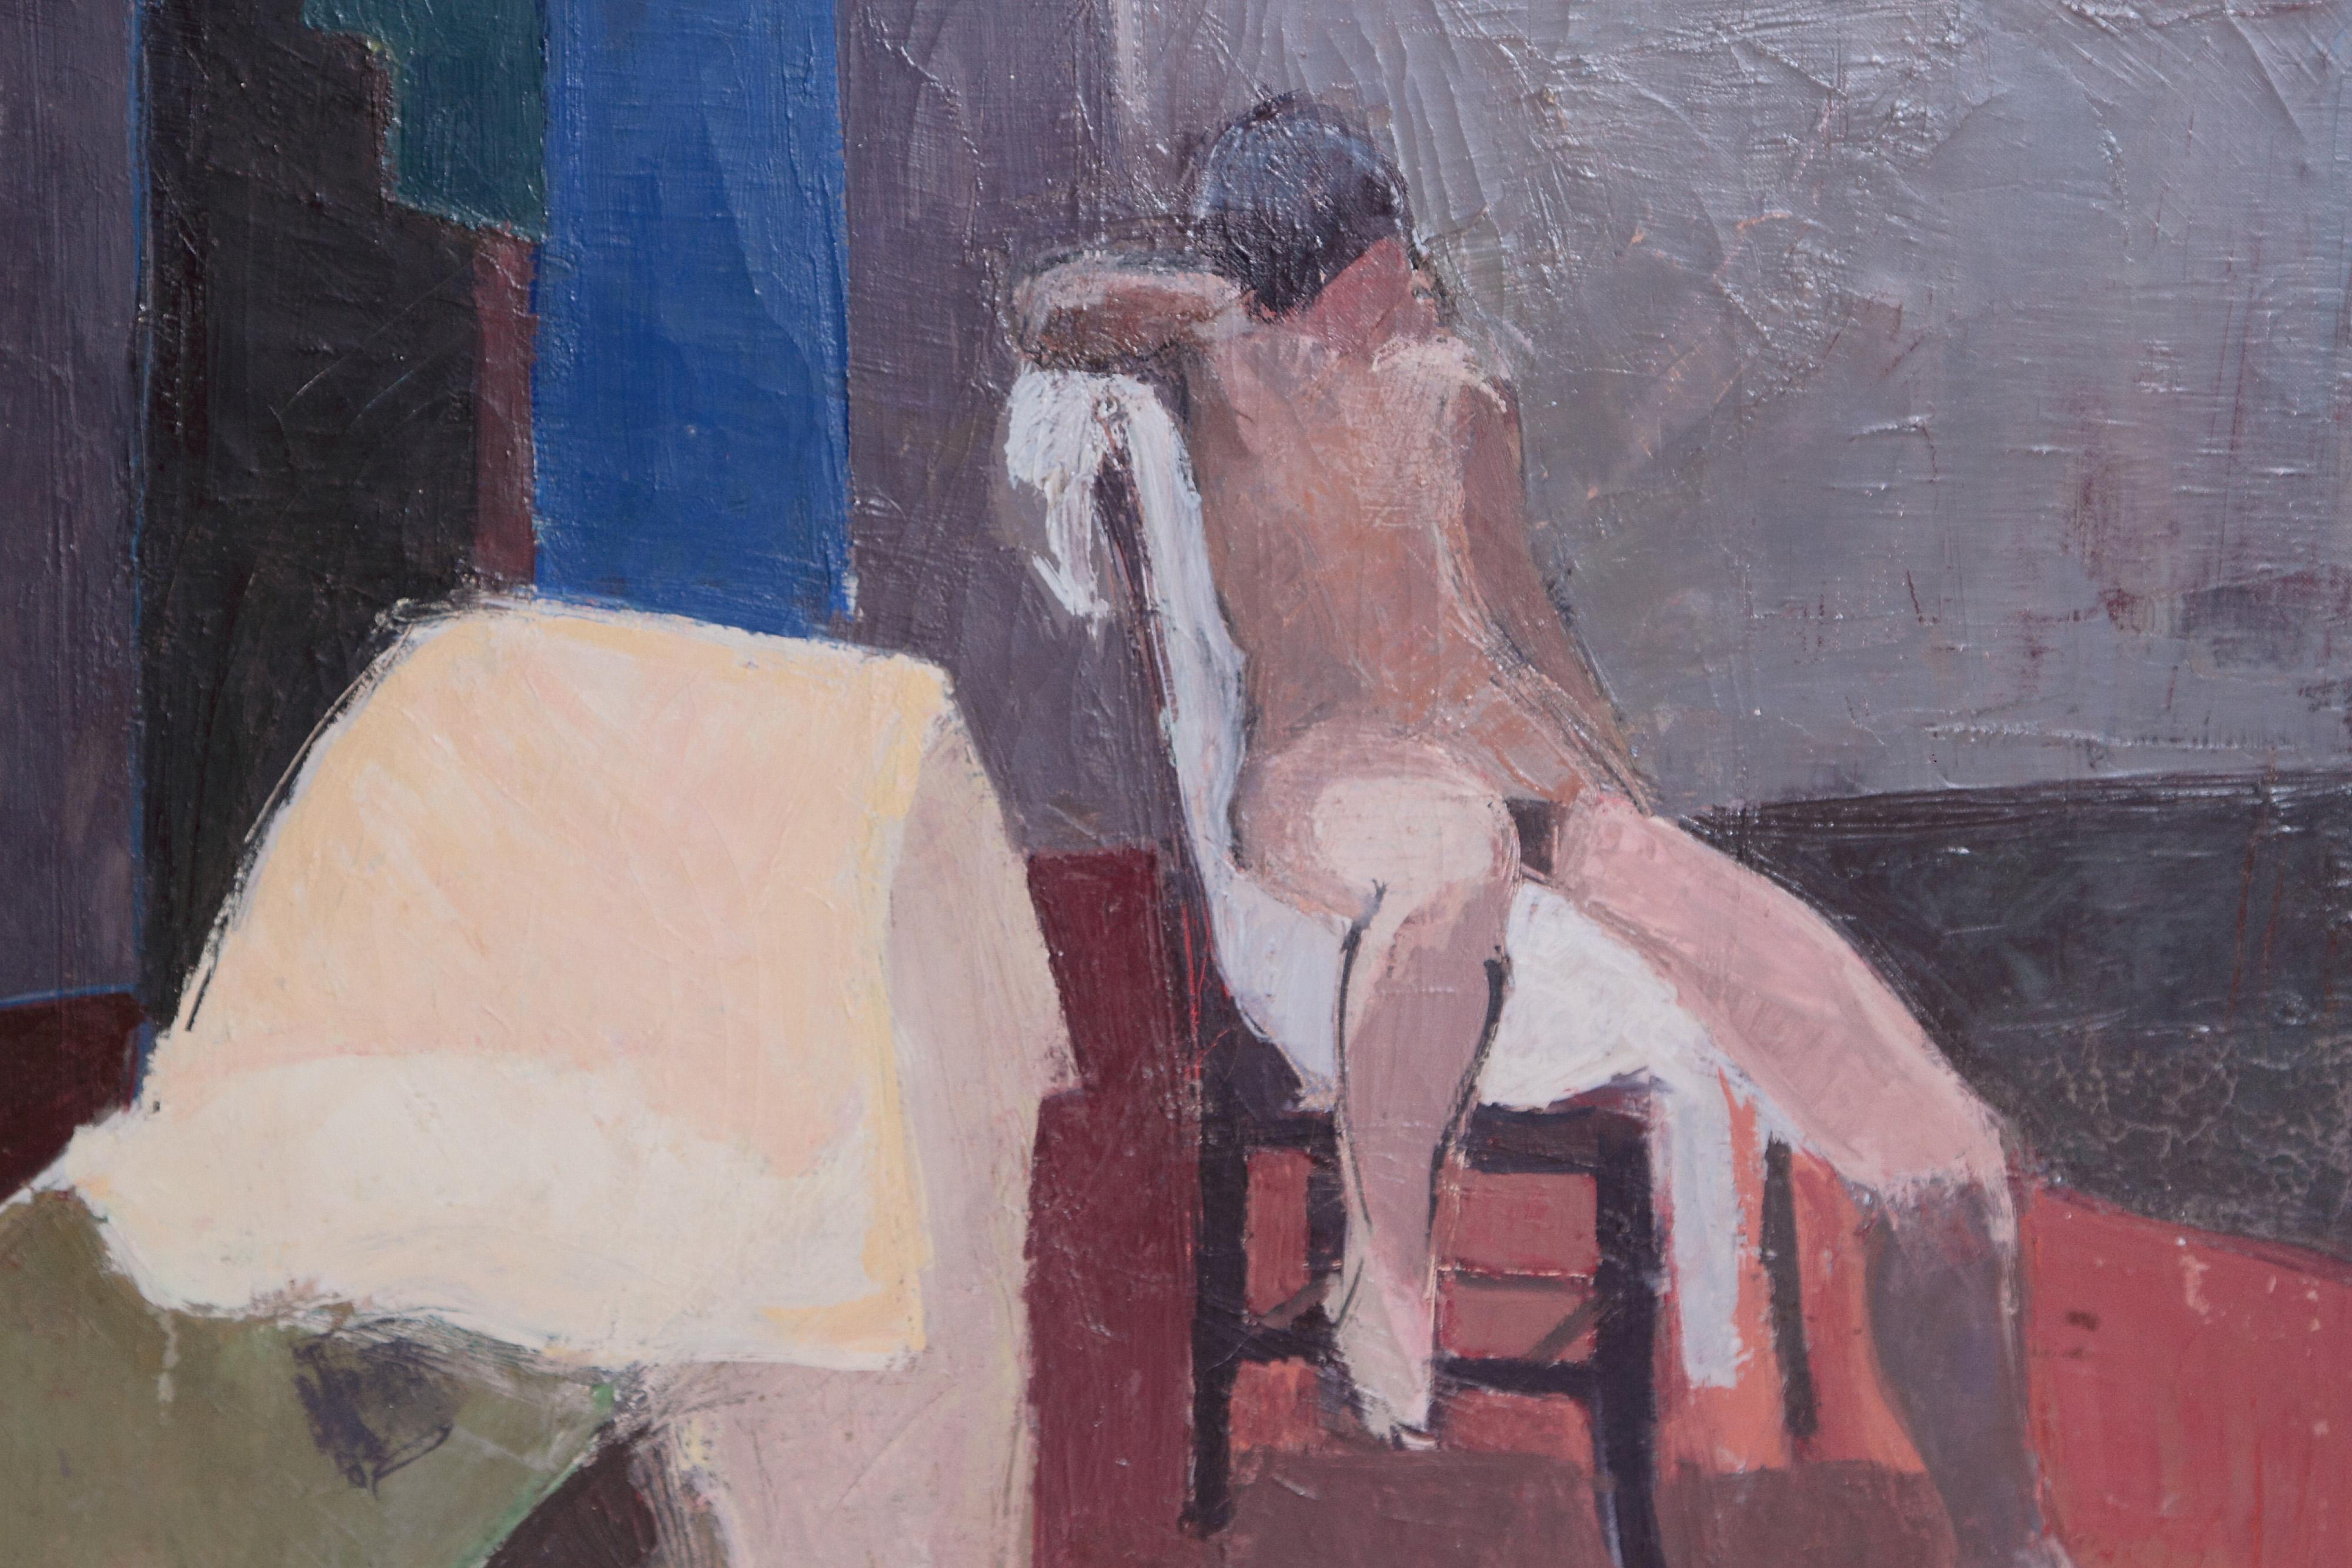 Modern Contemporary Oil on Canvas of a Nude in an Interior Seated on a Chair